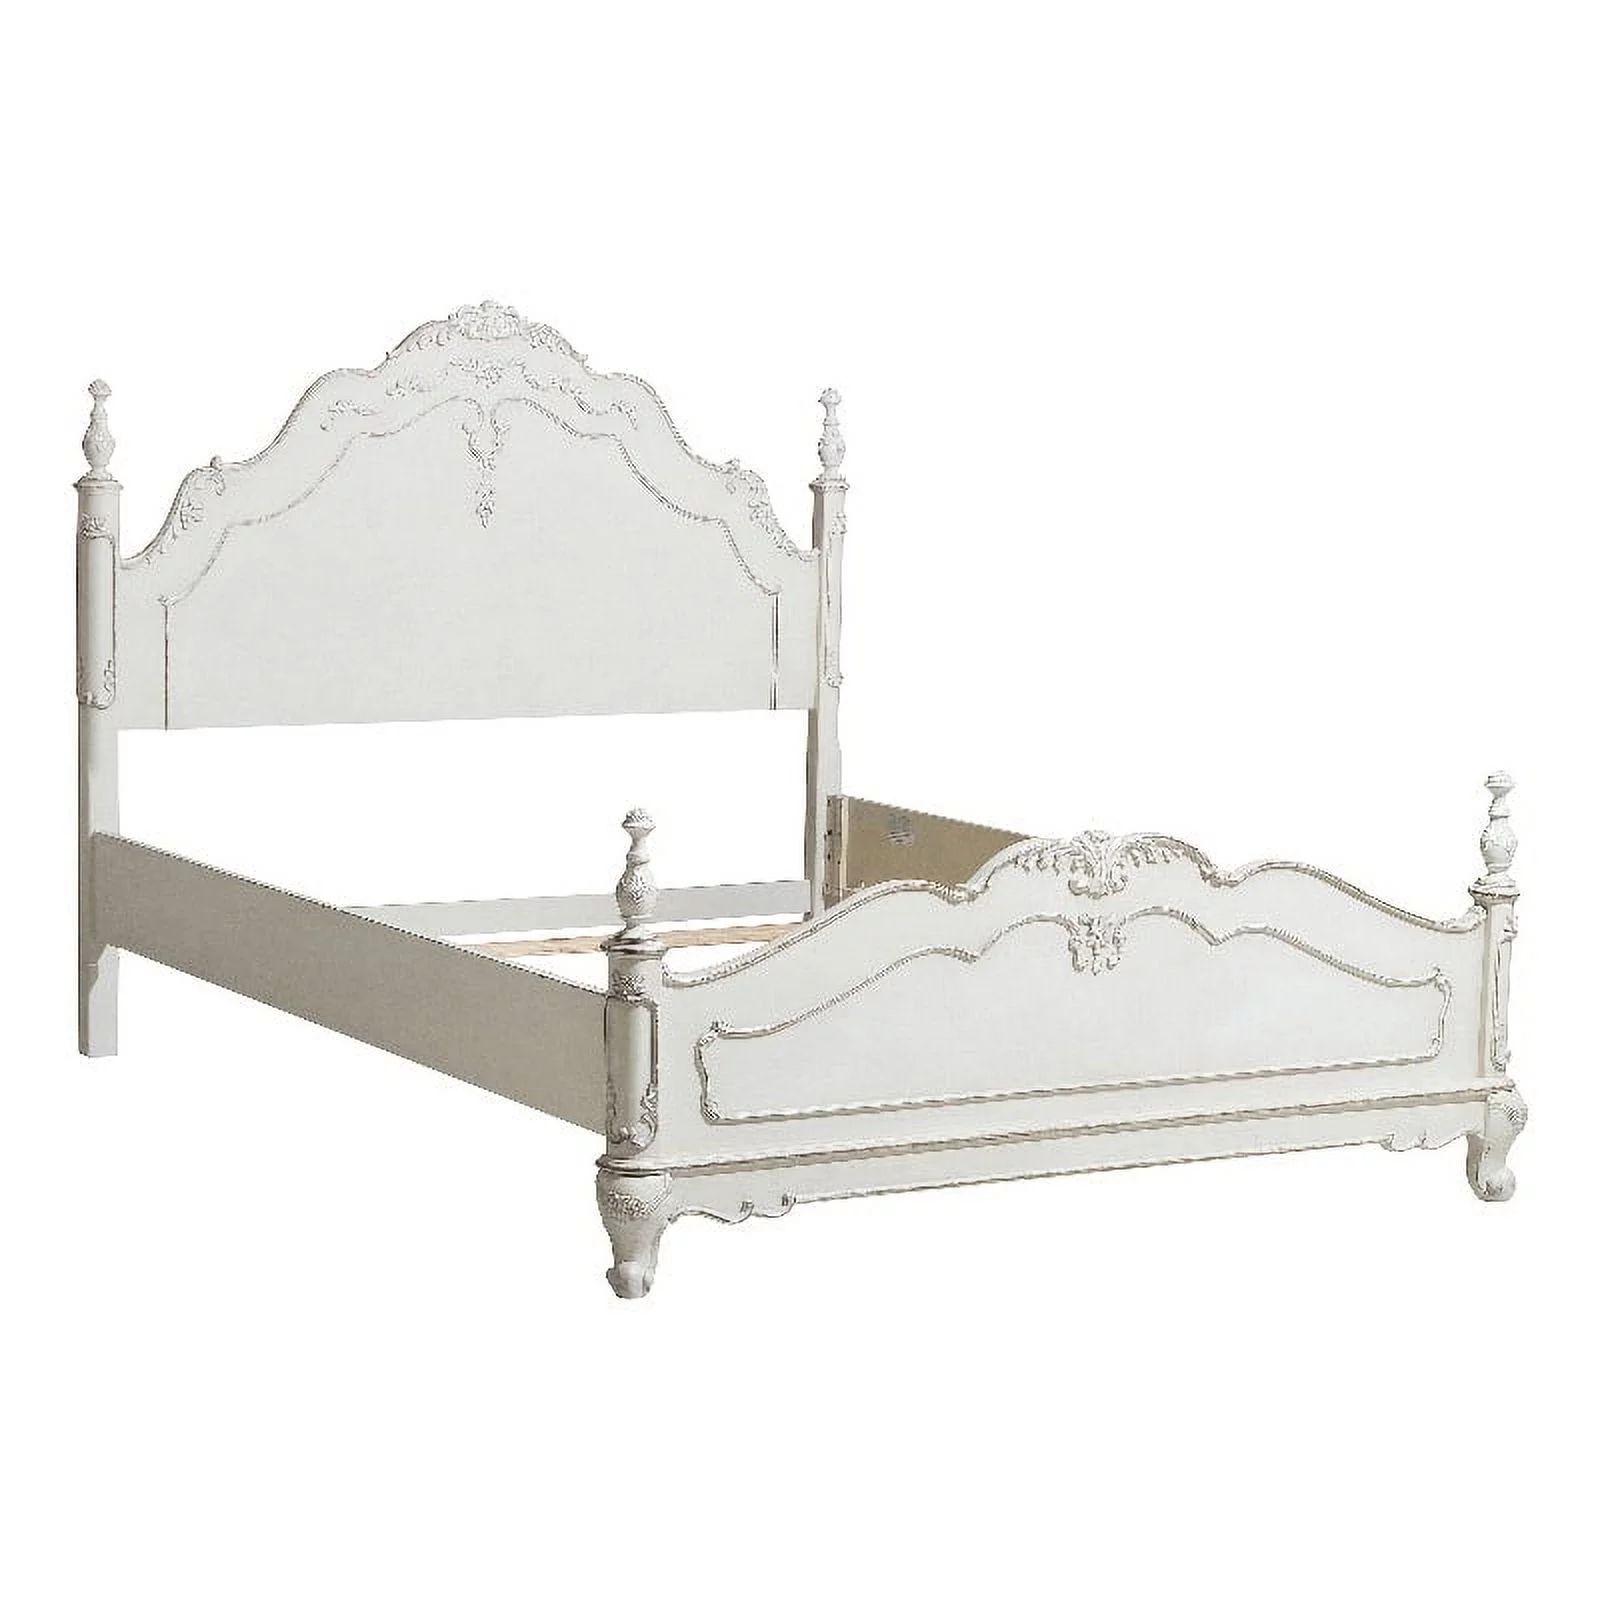 Lexicon Traditional Wood and MDF Board Queen Bed in Antique White/Gray | Walmart (US)